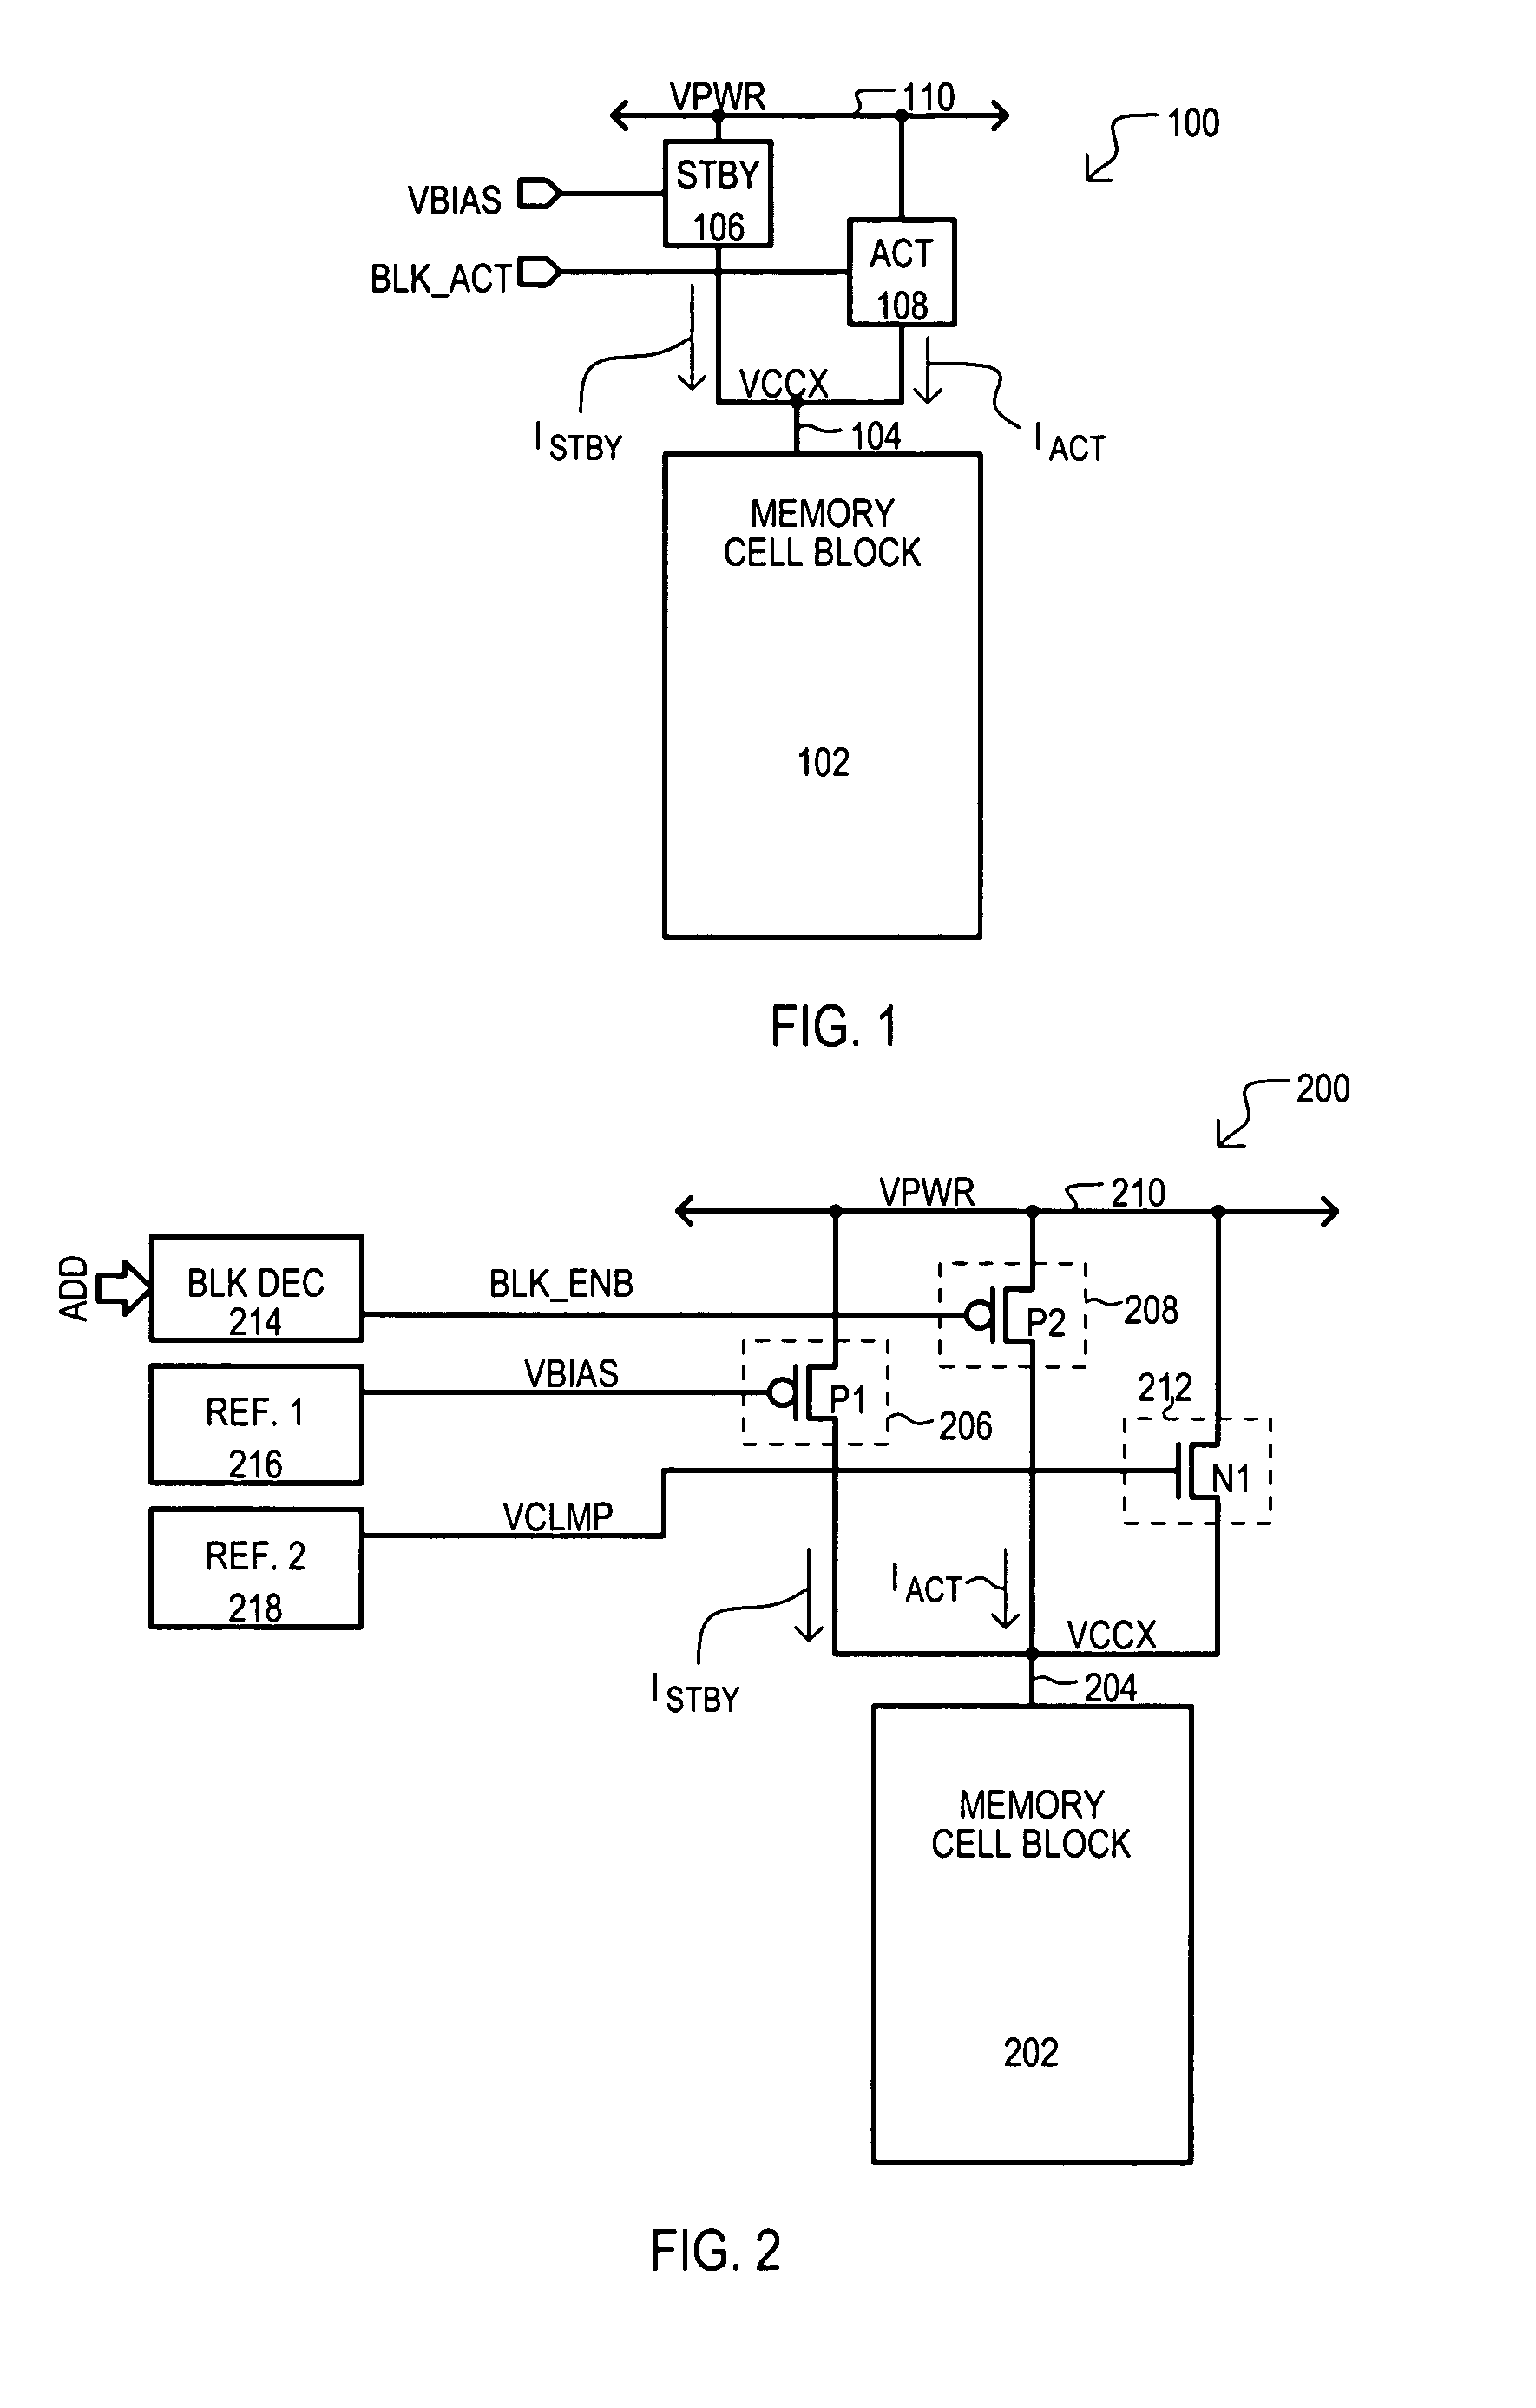 Current source architecture for memory device standby current reduction